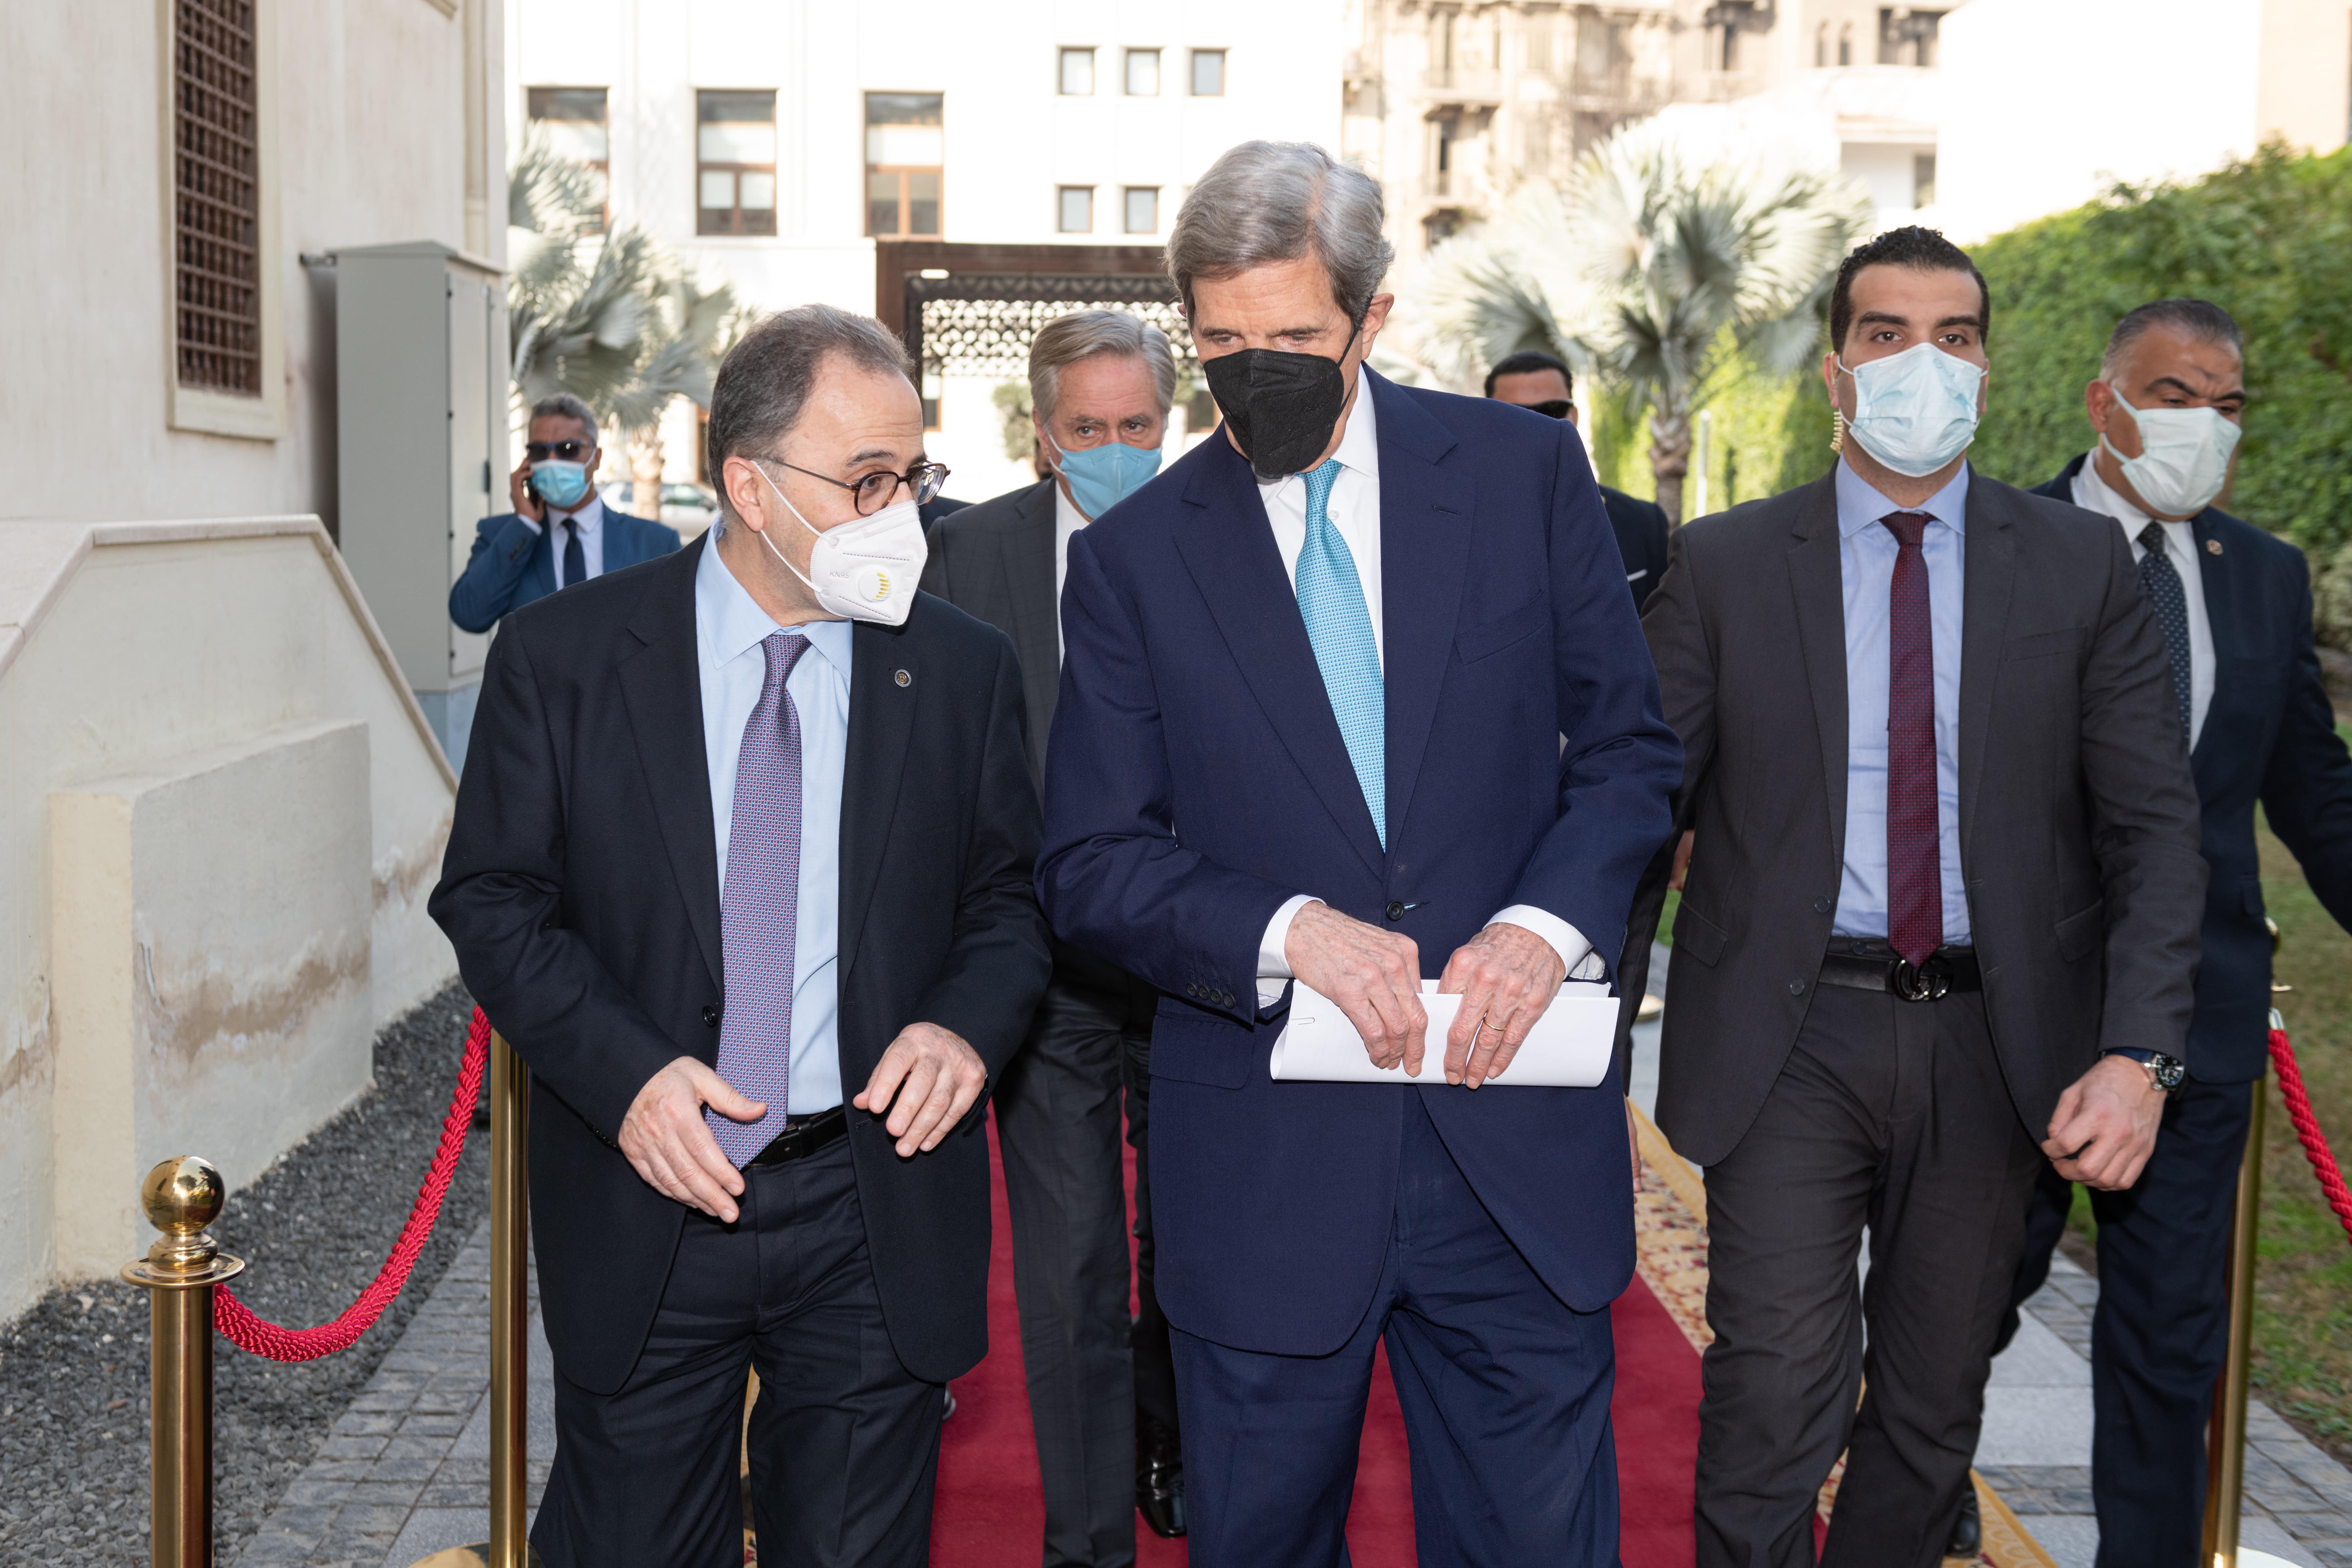 AUC President Ahmad Dallal and U.S. Special Presidential Envoy for Climate John Kerry walking together with people